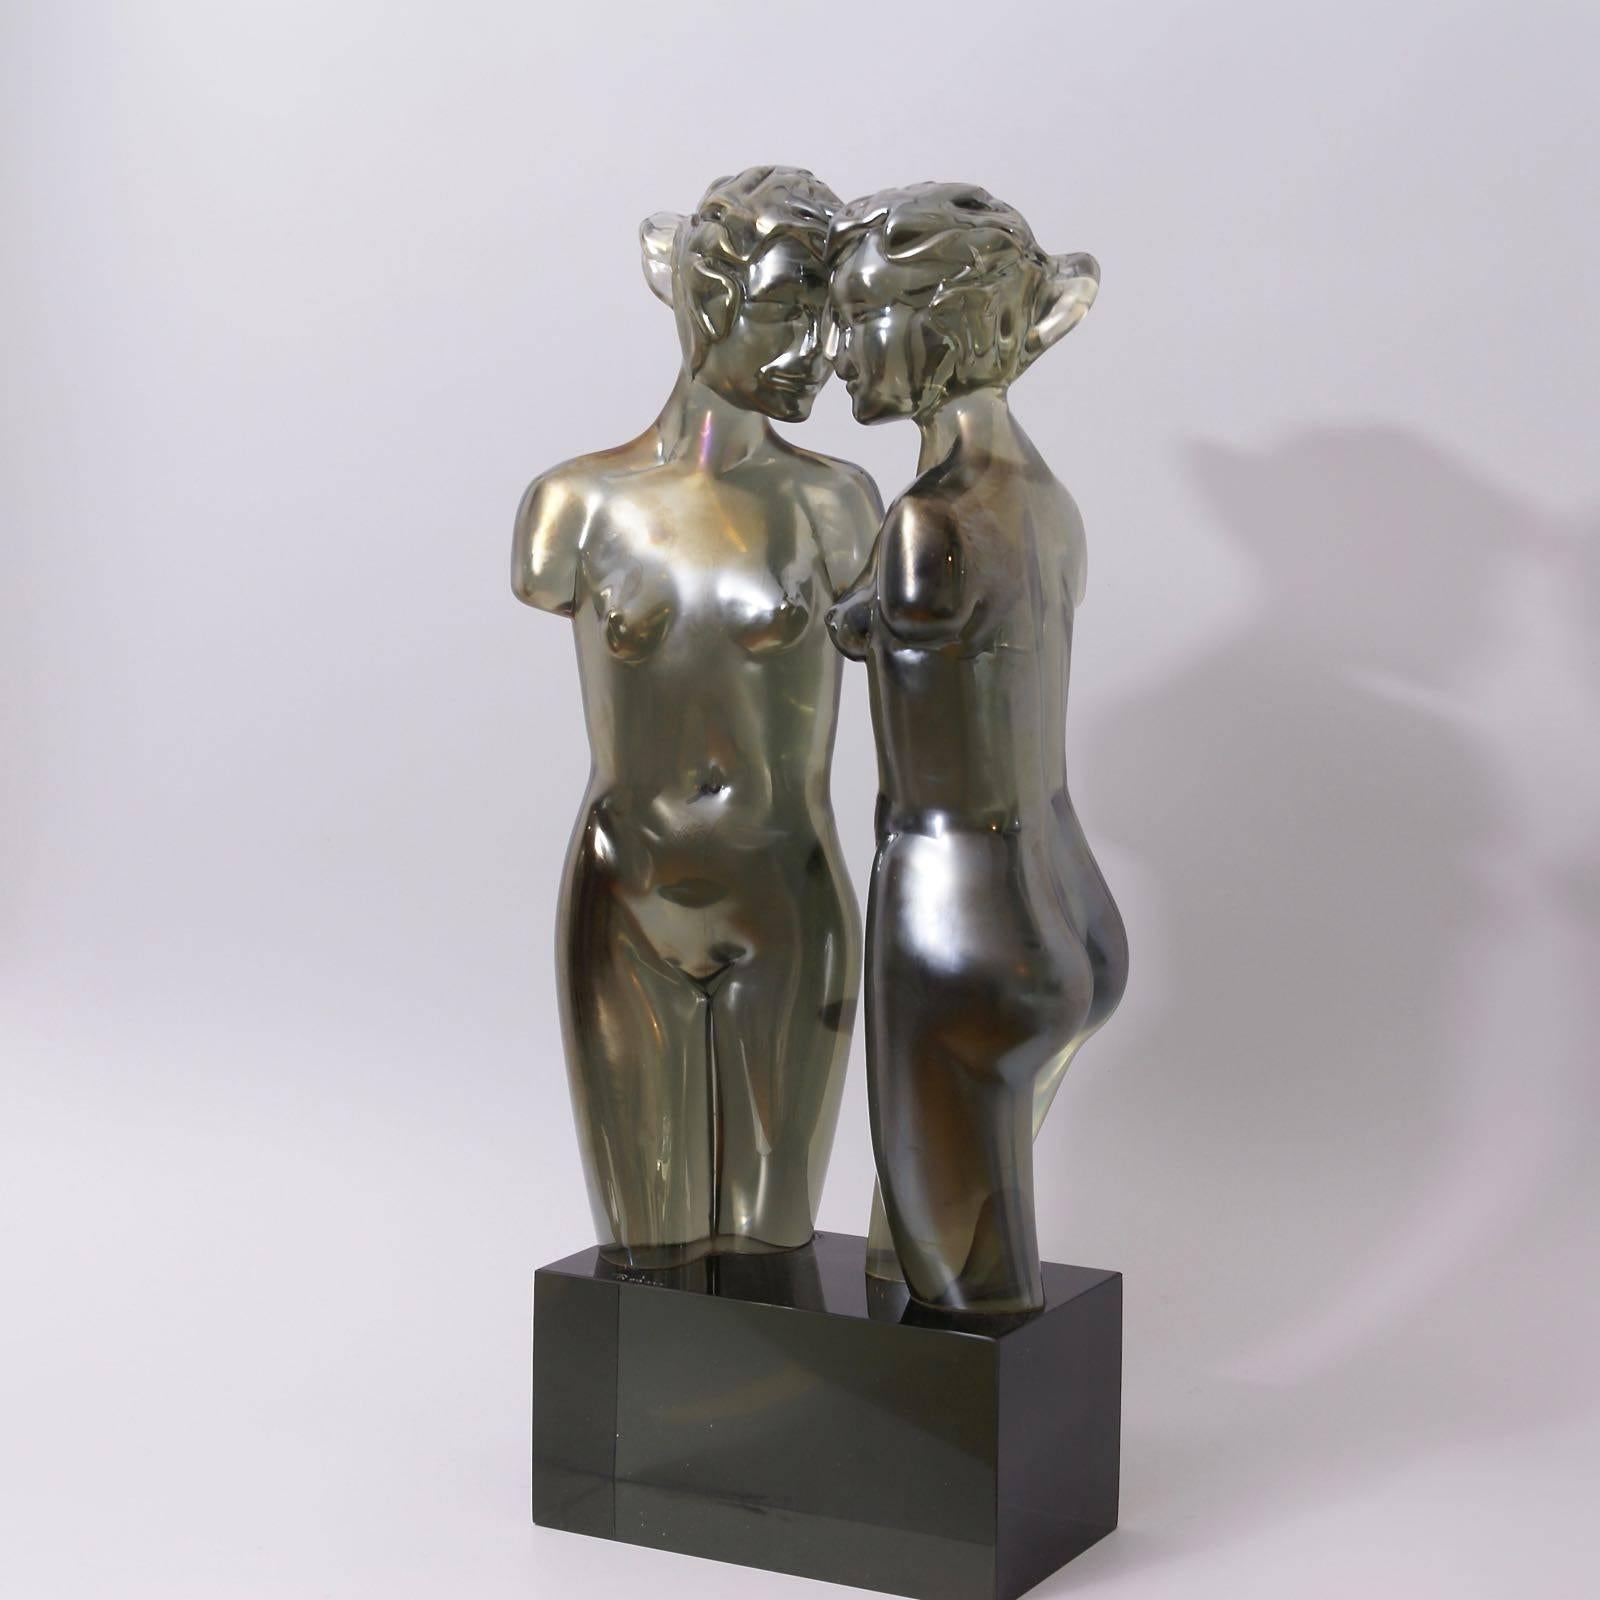 Large Murano glass sculpture by Loredano Rosin. The two women slightly iridescent grey glass on a grey glass base. Engraved signature 